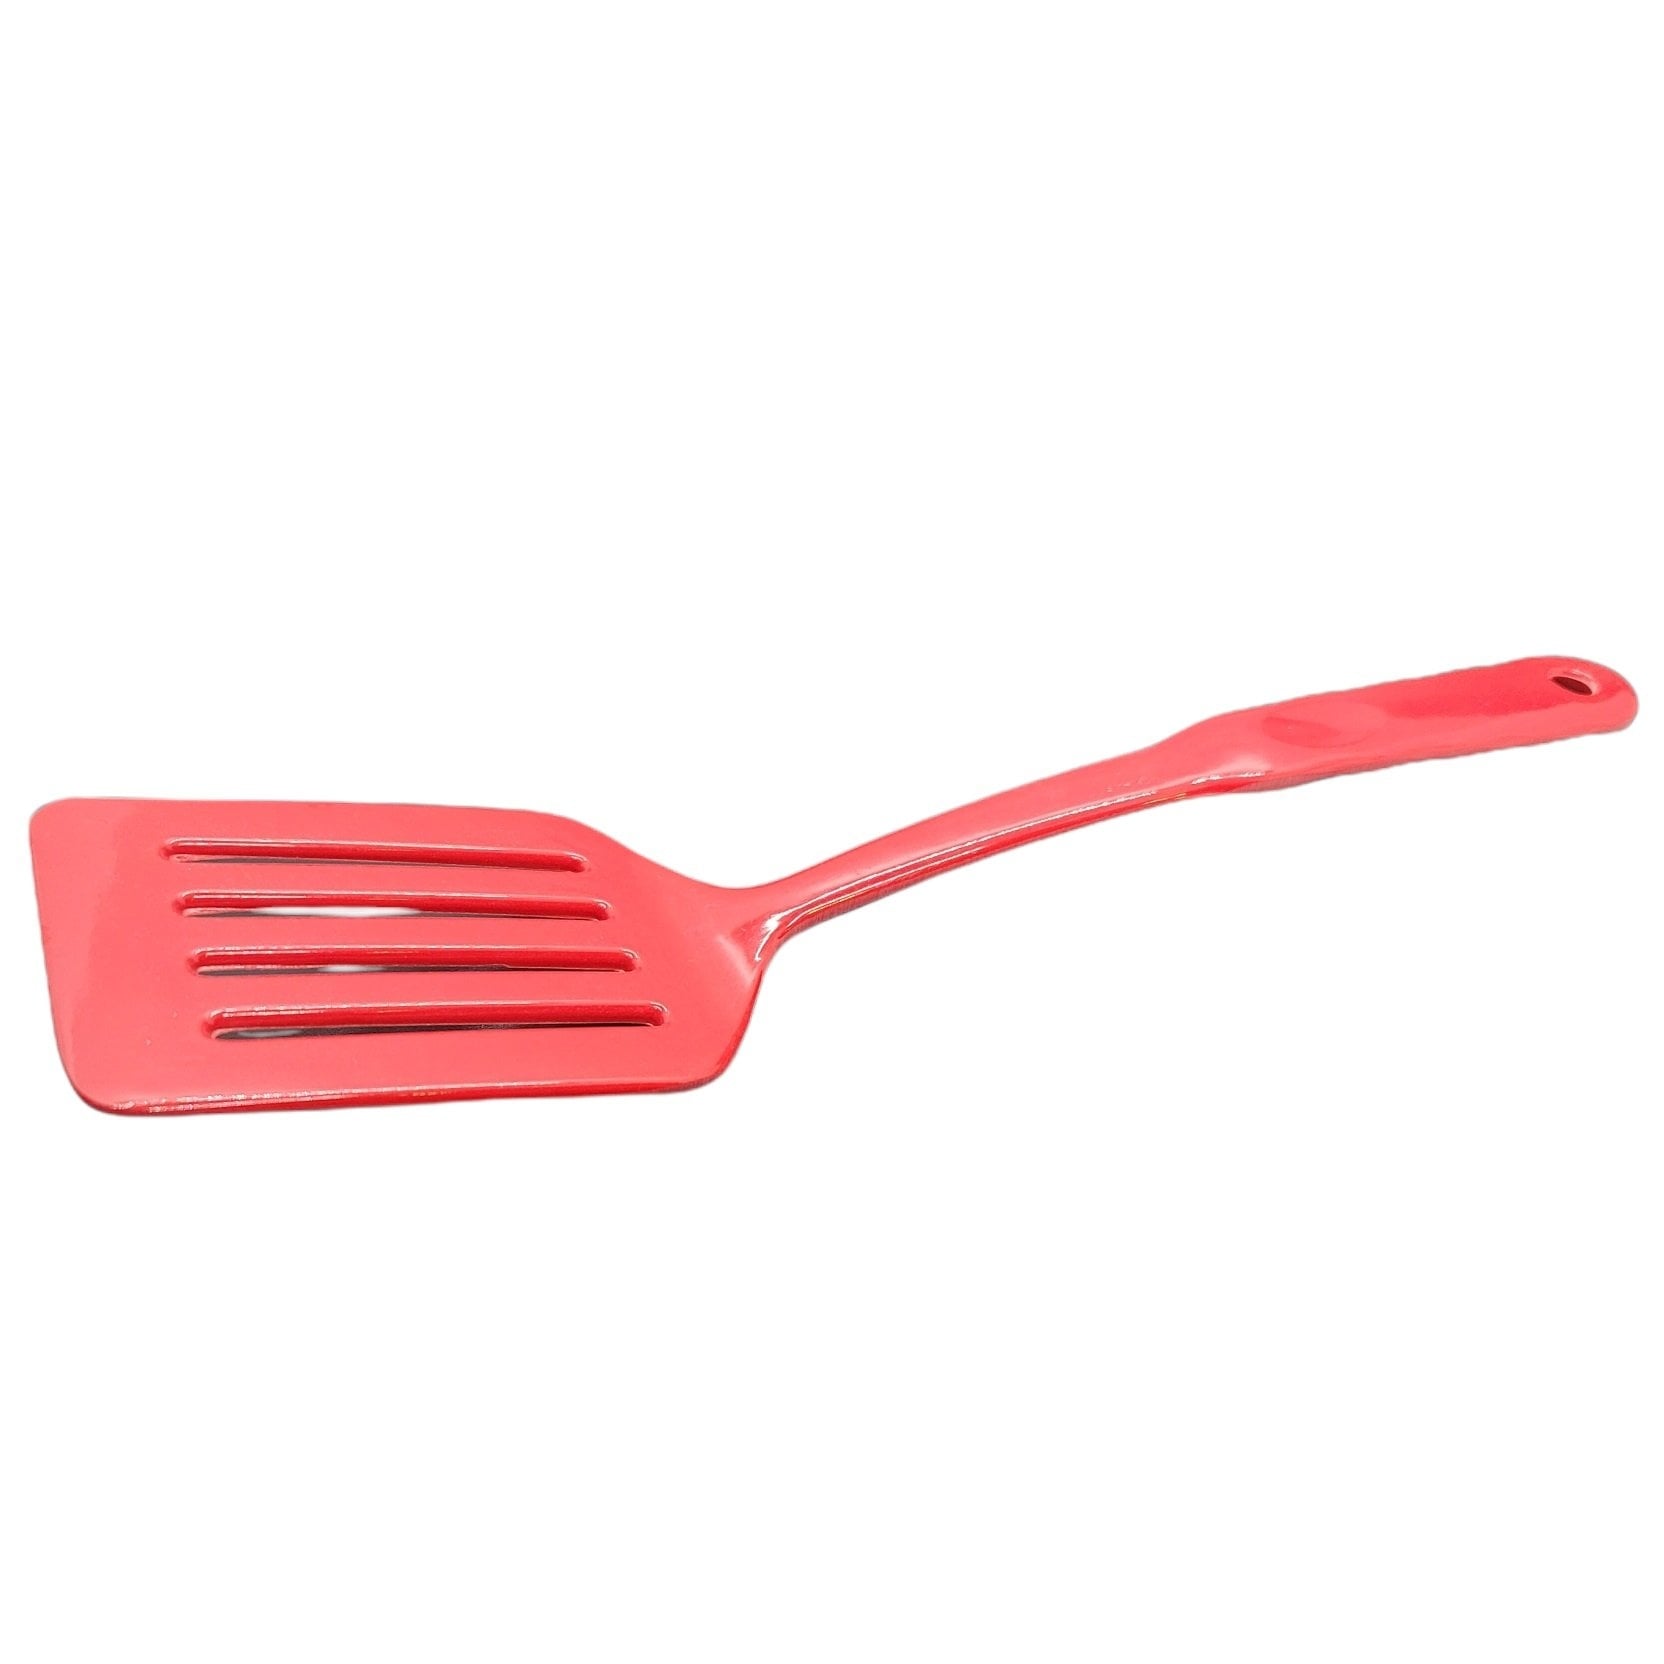 https://ak1.ostkcdn.com/images/products/is/images/direct/cfe6bac1faba640027bf06bb710a2a8b93fa15d0/Handy-Housewares-12.5%22-Long-Handled-Colorful-Melamine-Slotted-Cooking-Turner-Spatula.jpg